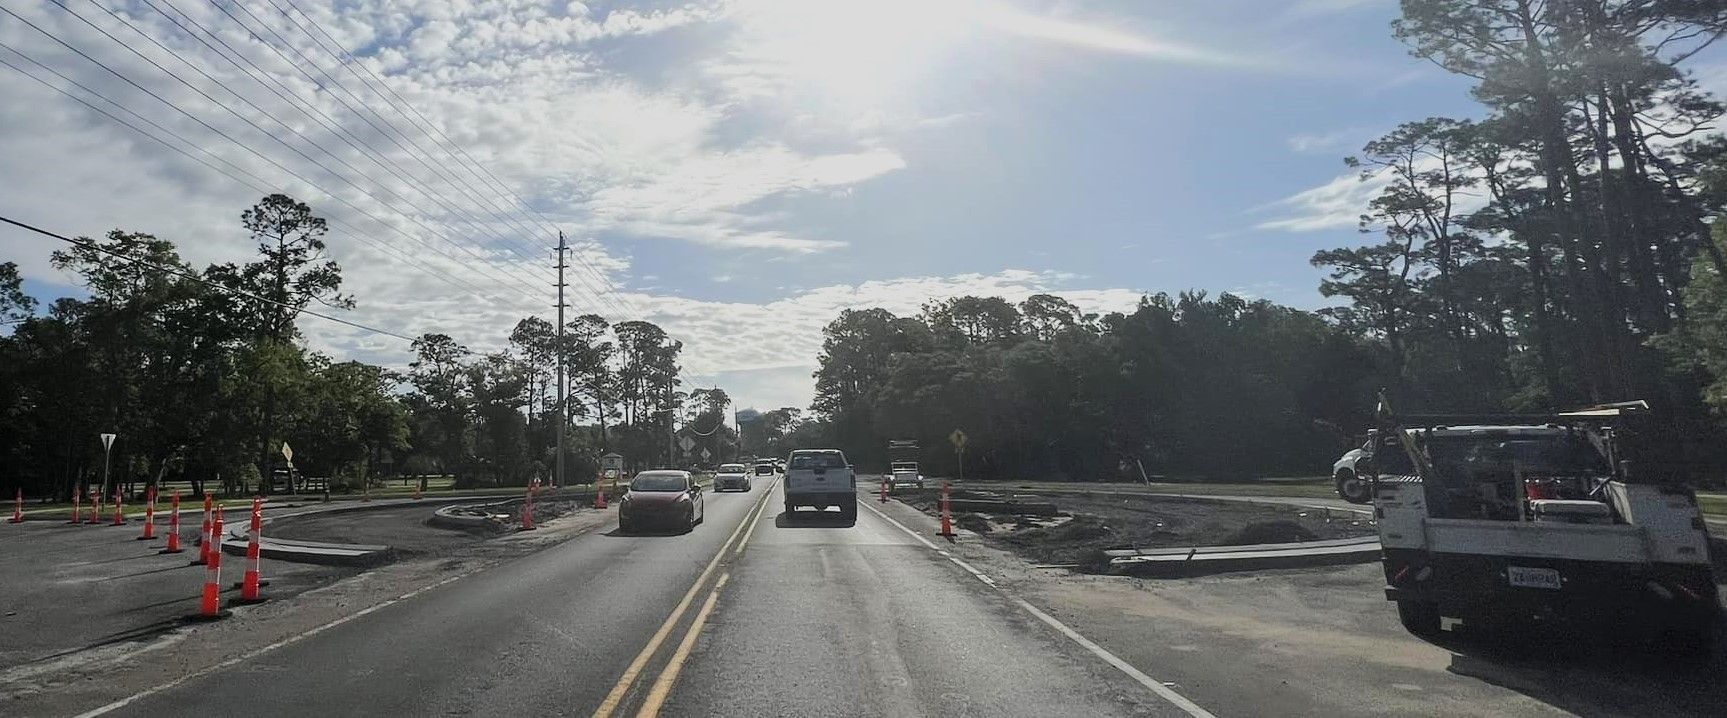 A new roundabout in Orange Beach, Alabama, will help congestion along Canal Road and 161.